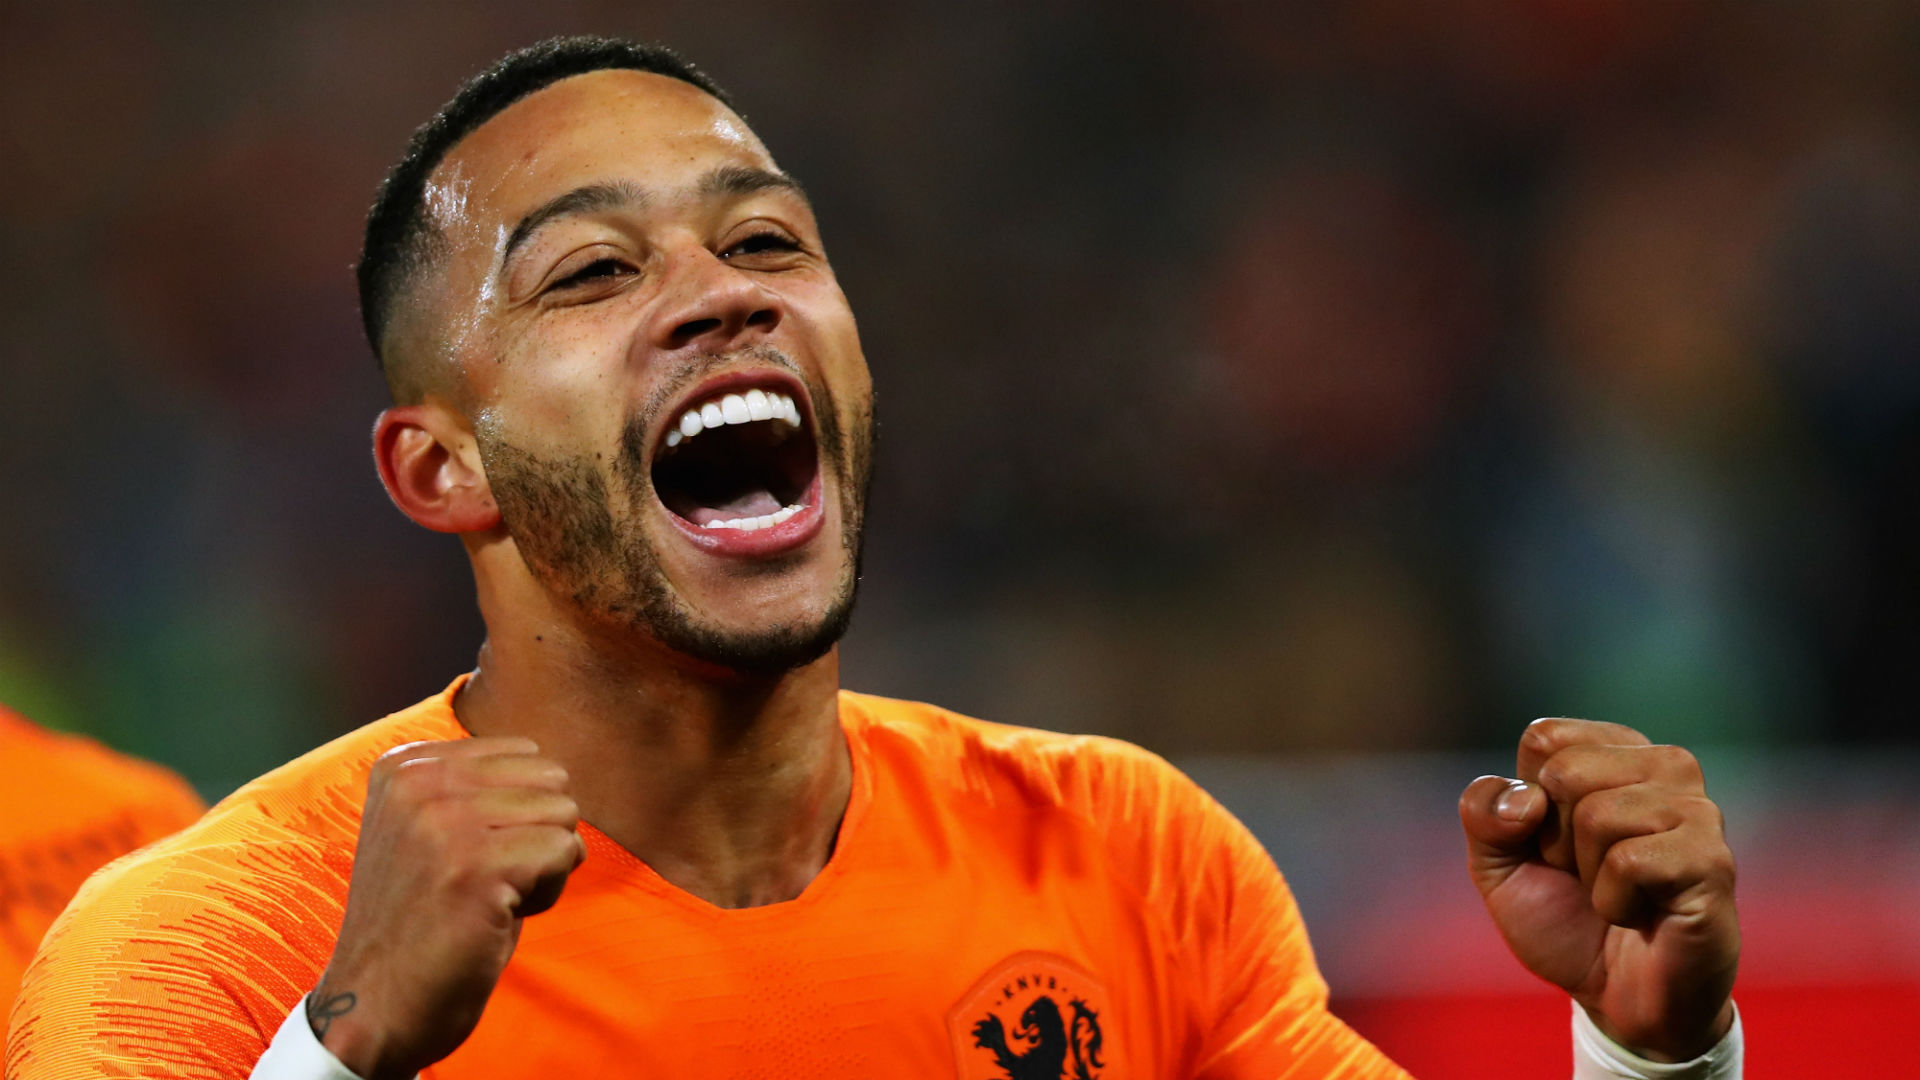 Memphis Depay got two goals and a pair of assists in Netherland's 4-0 Belarus win, but Ronald Koeman was not entirely happy with his team.